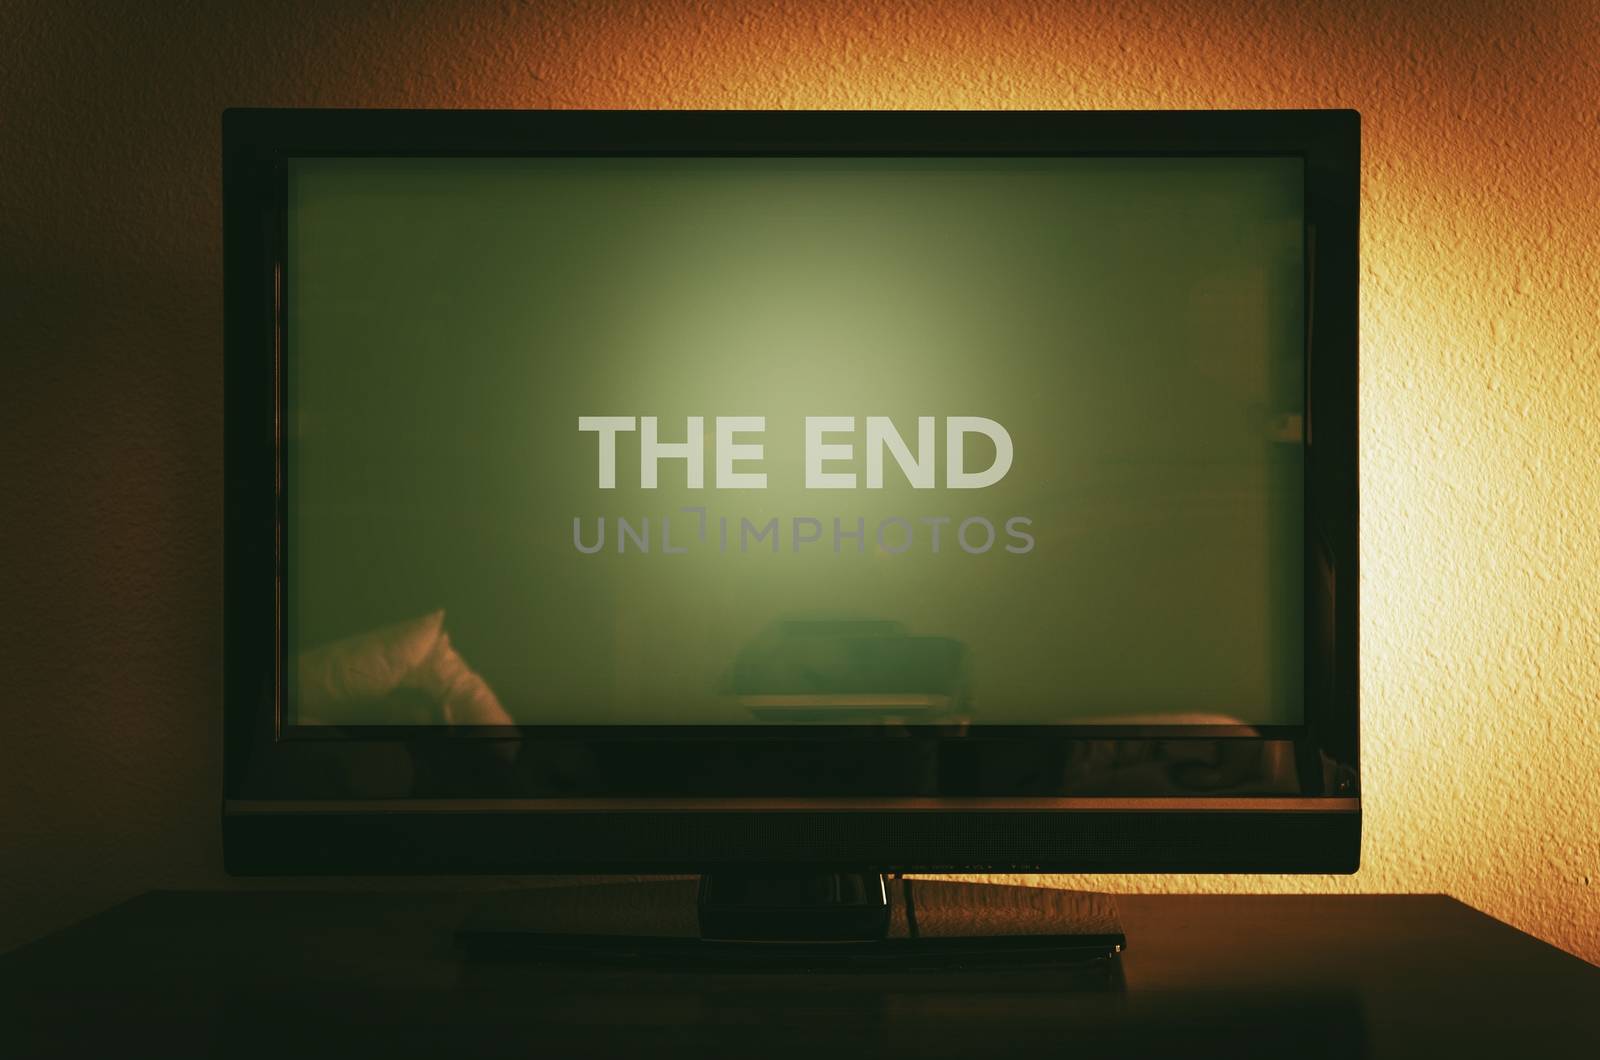 The End of Television Photo Concept. Flat Screen Television Displaying The End information.